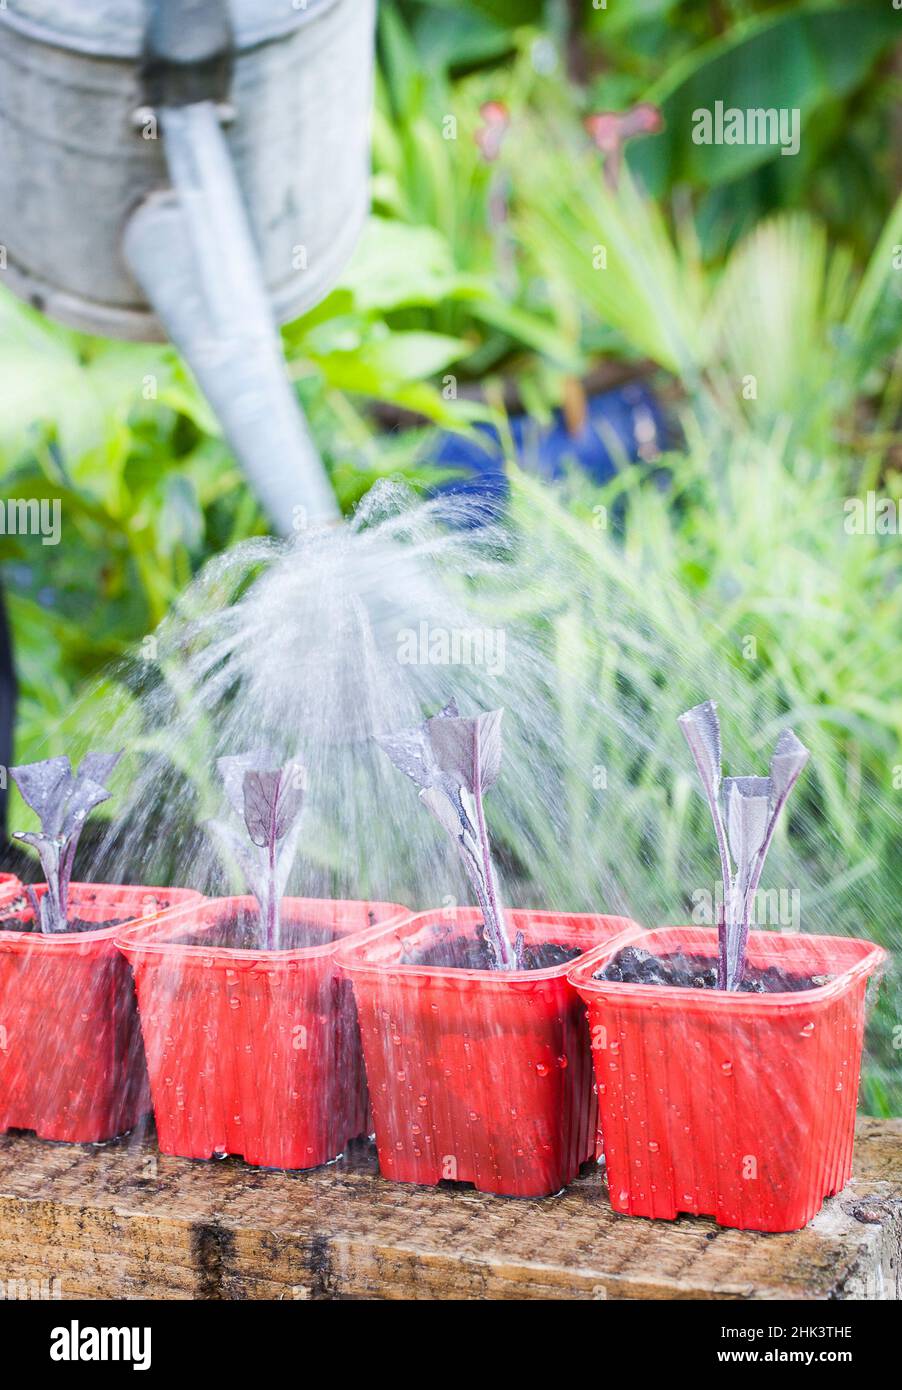 Watering cuttings in summer Stock Photo